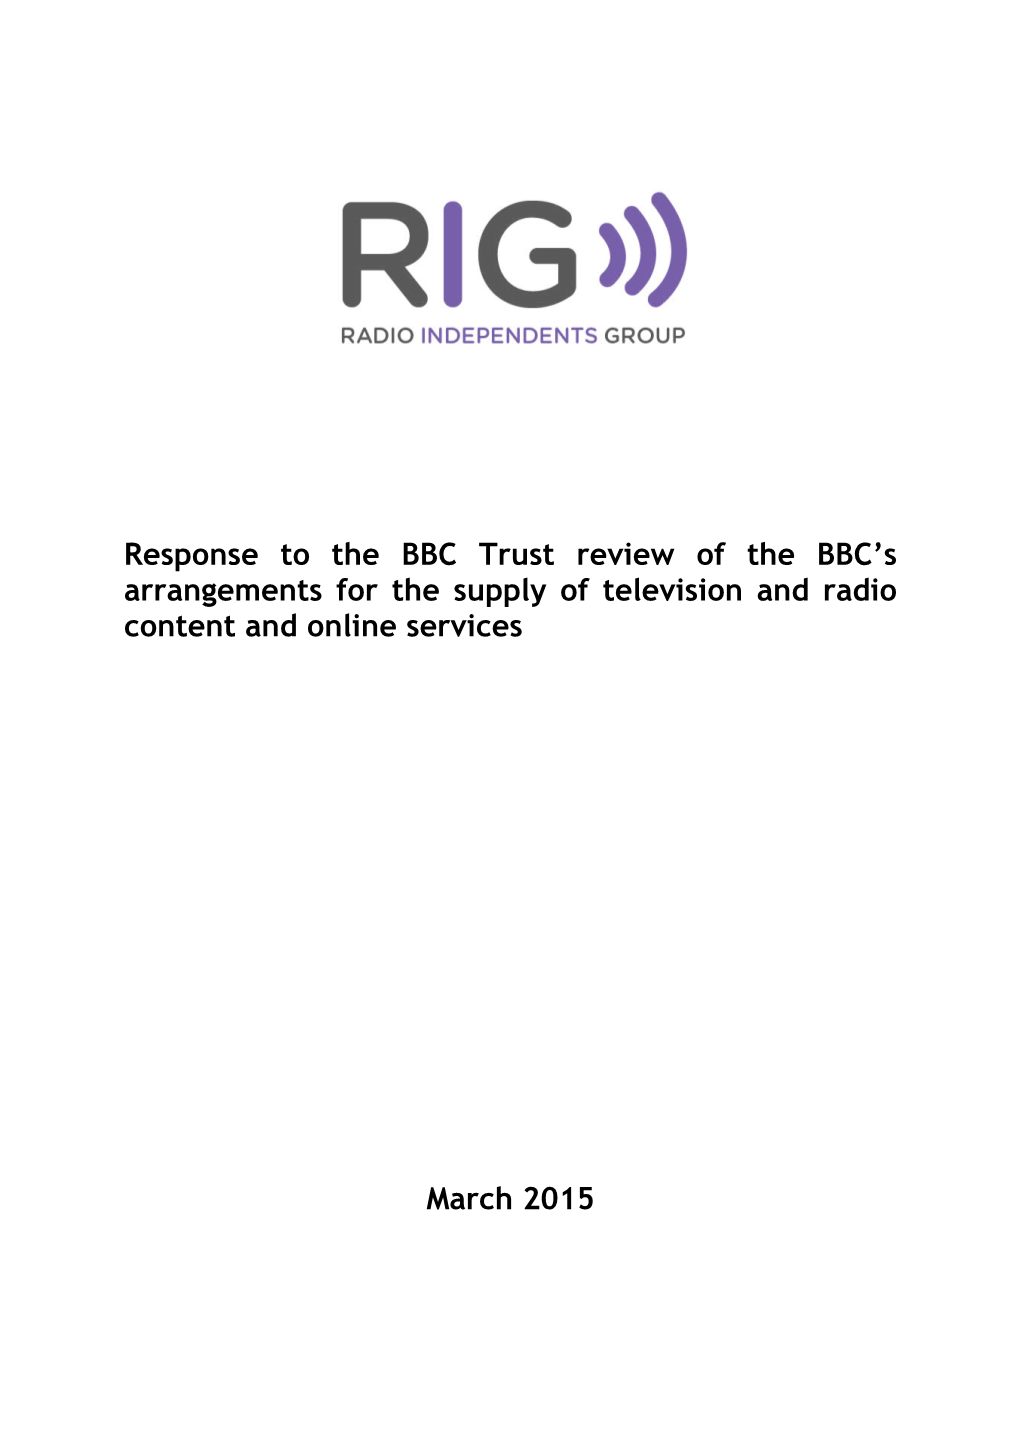 Response to the BBC Trust Review of the BBC's Arrangements for The